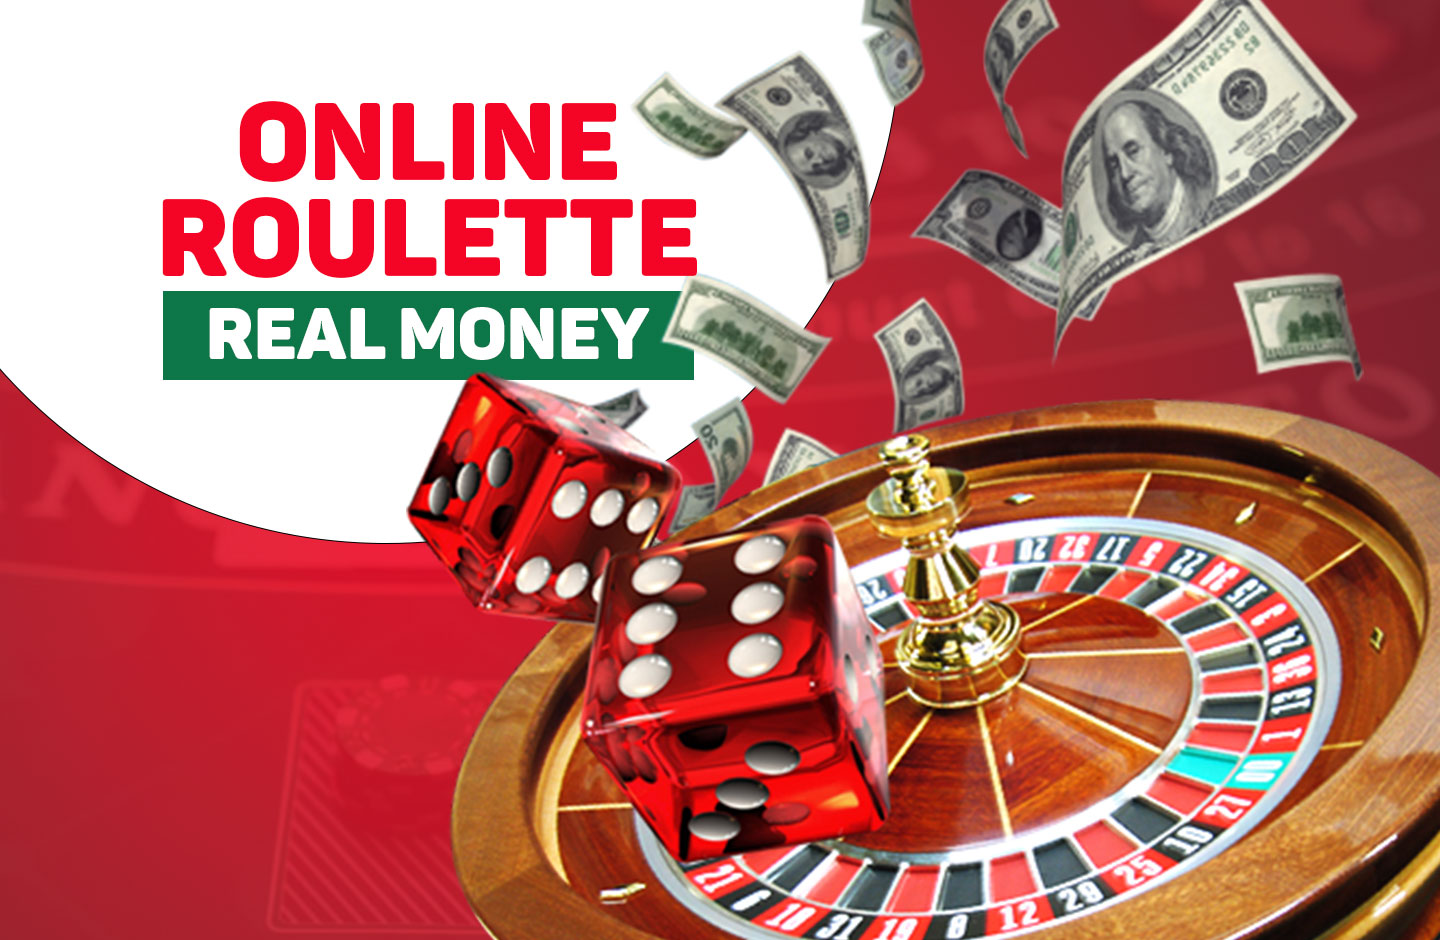 What States Can You Play Online Roulette?